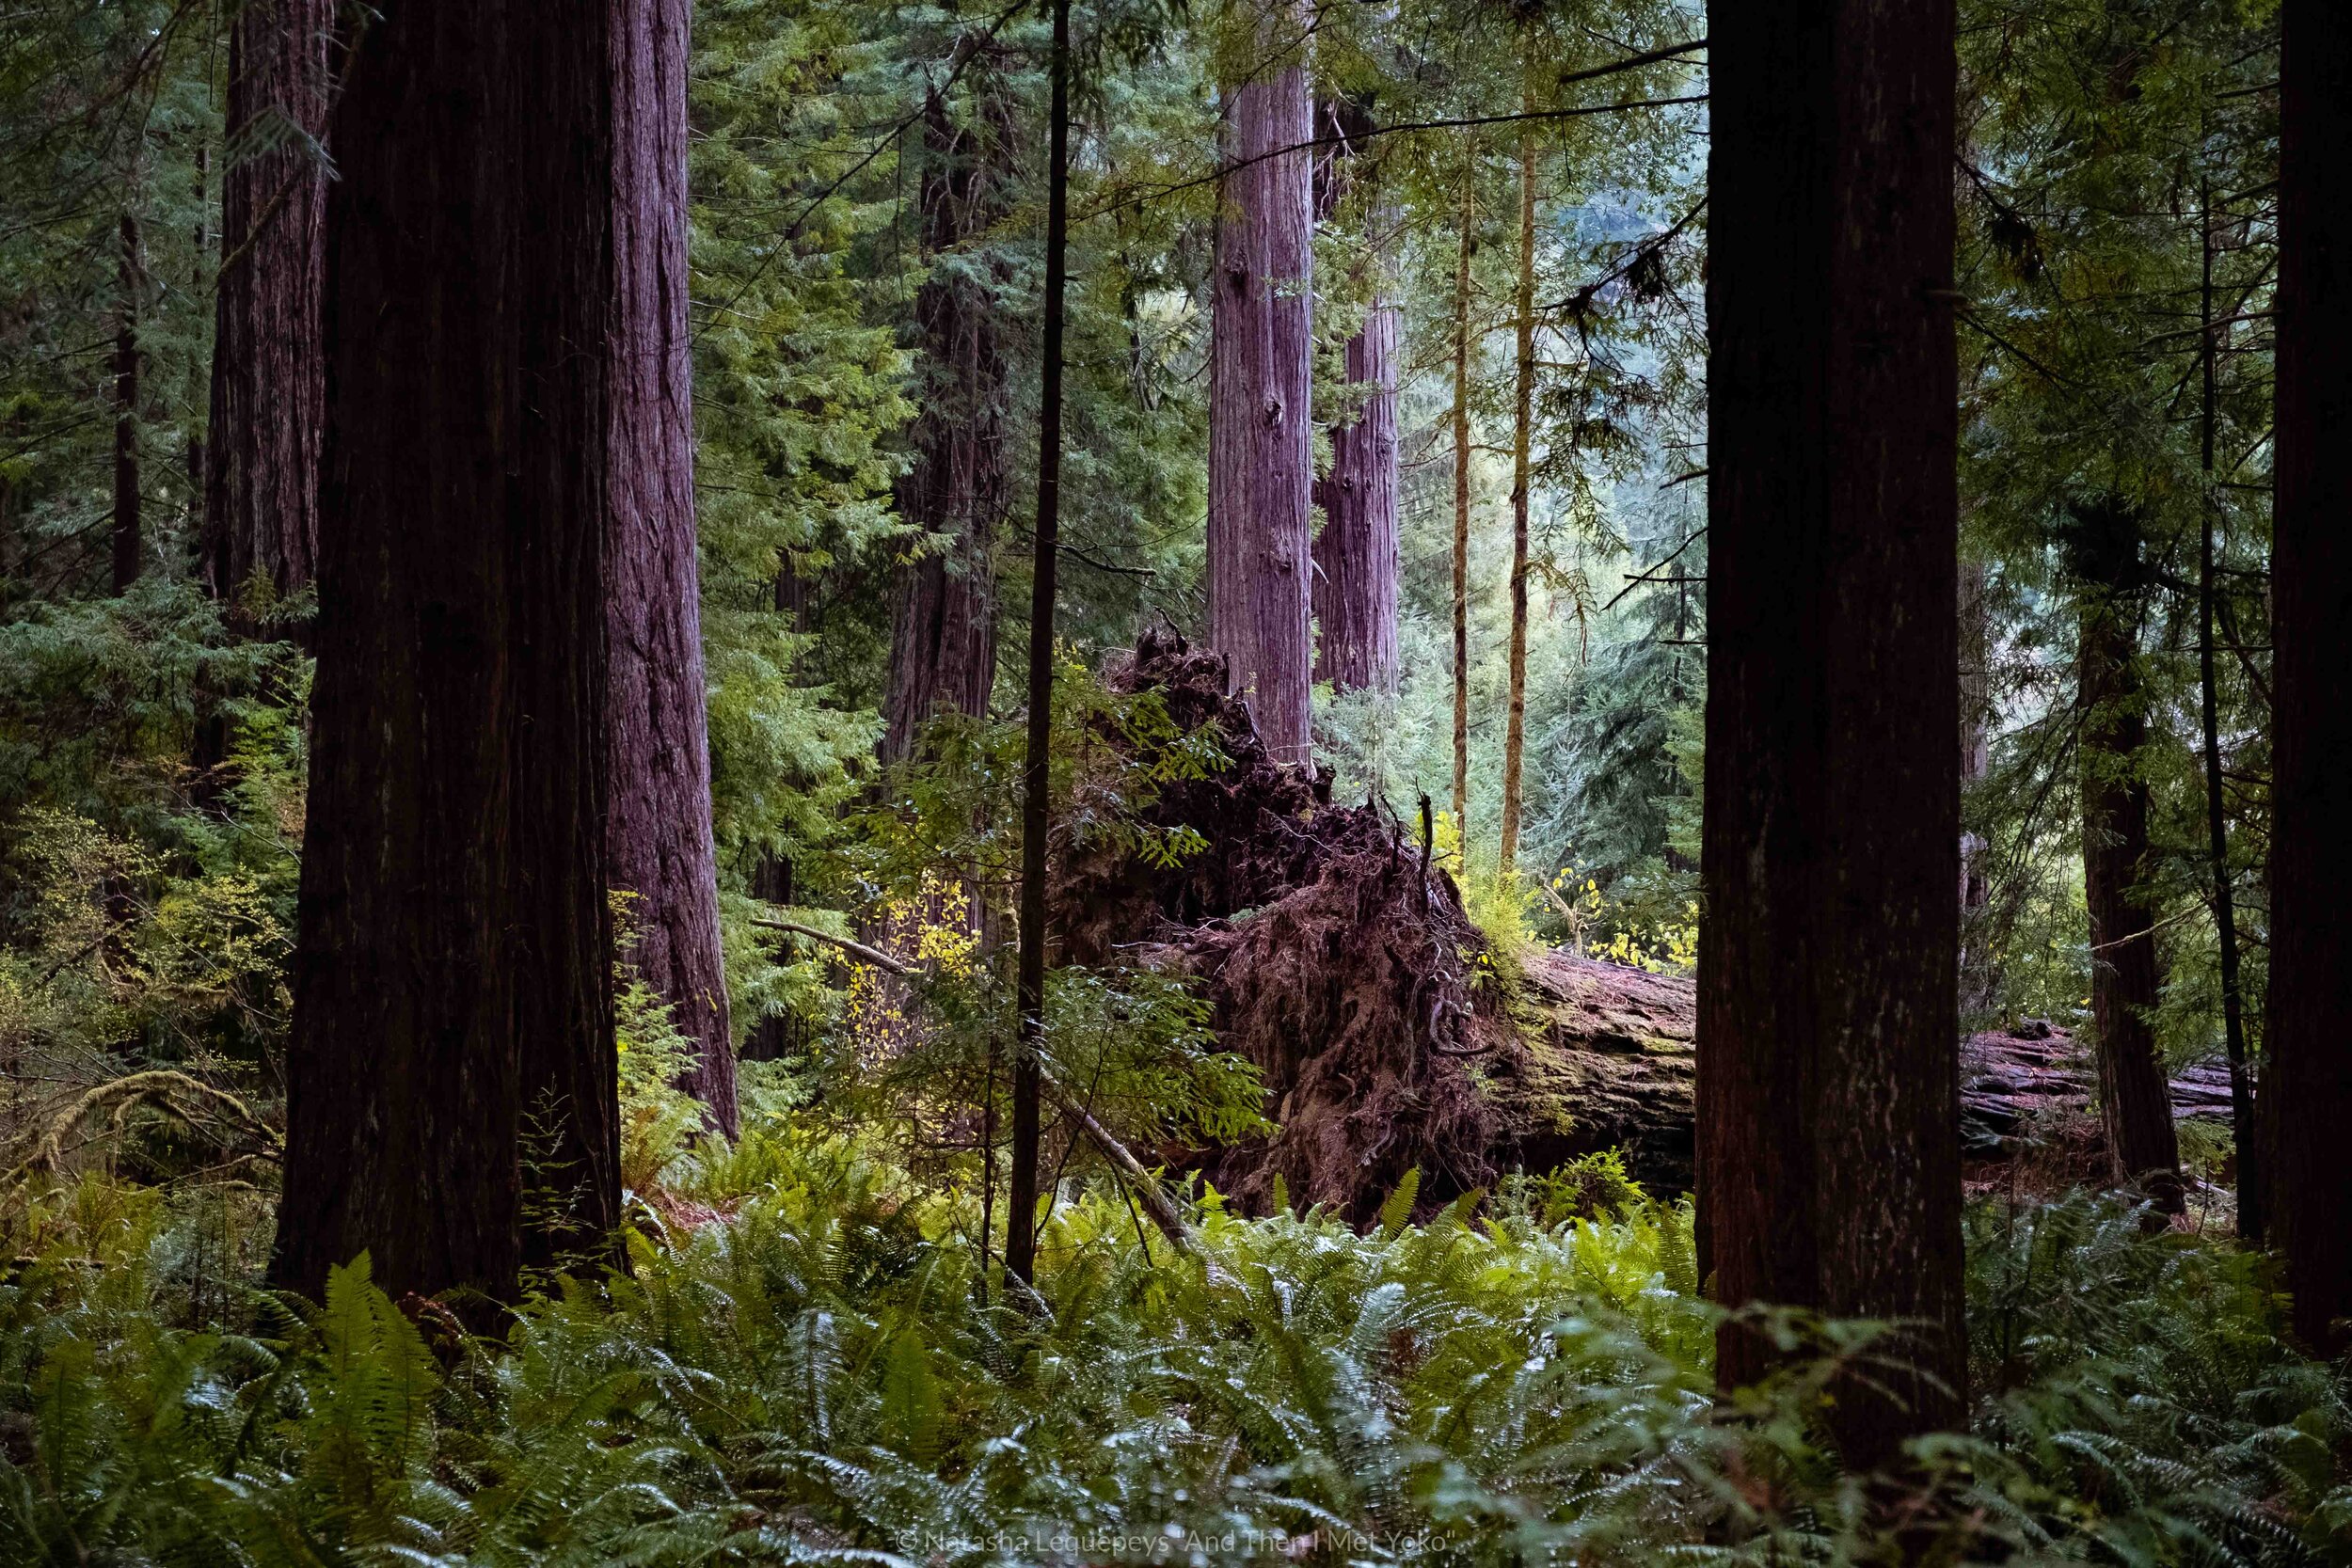 Big Tree Hike - Redwoods National Park, California, USA. Travel photography and guide by © Natasha Lequepeys for "And Then I Met Yoko". #california #redwoodnationalpark #travelblog #travelphotography